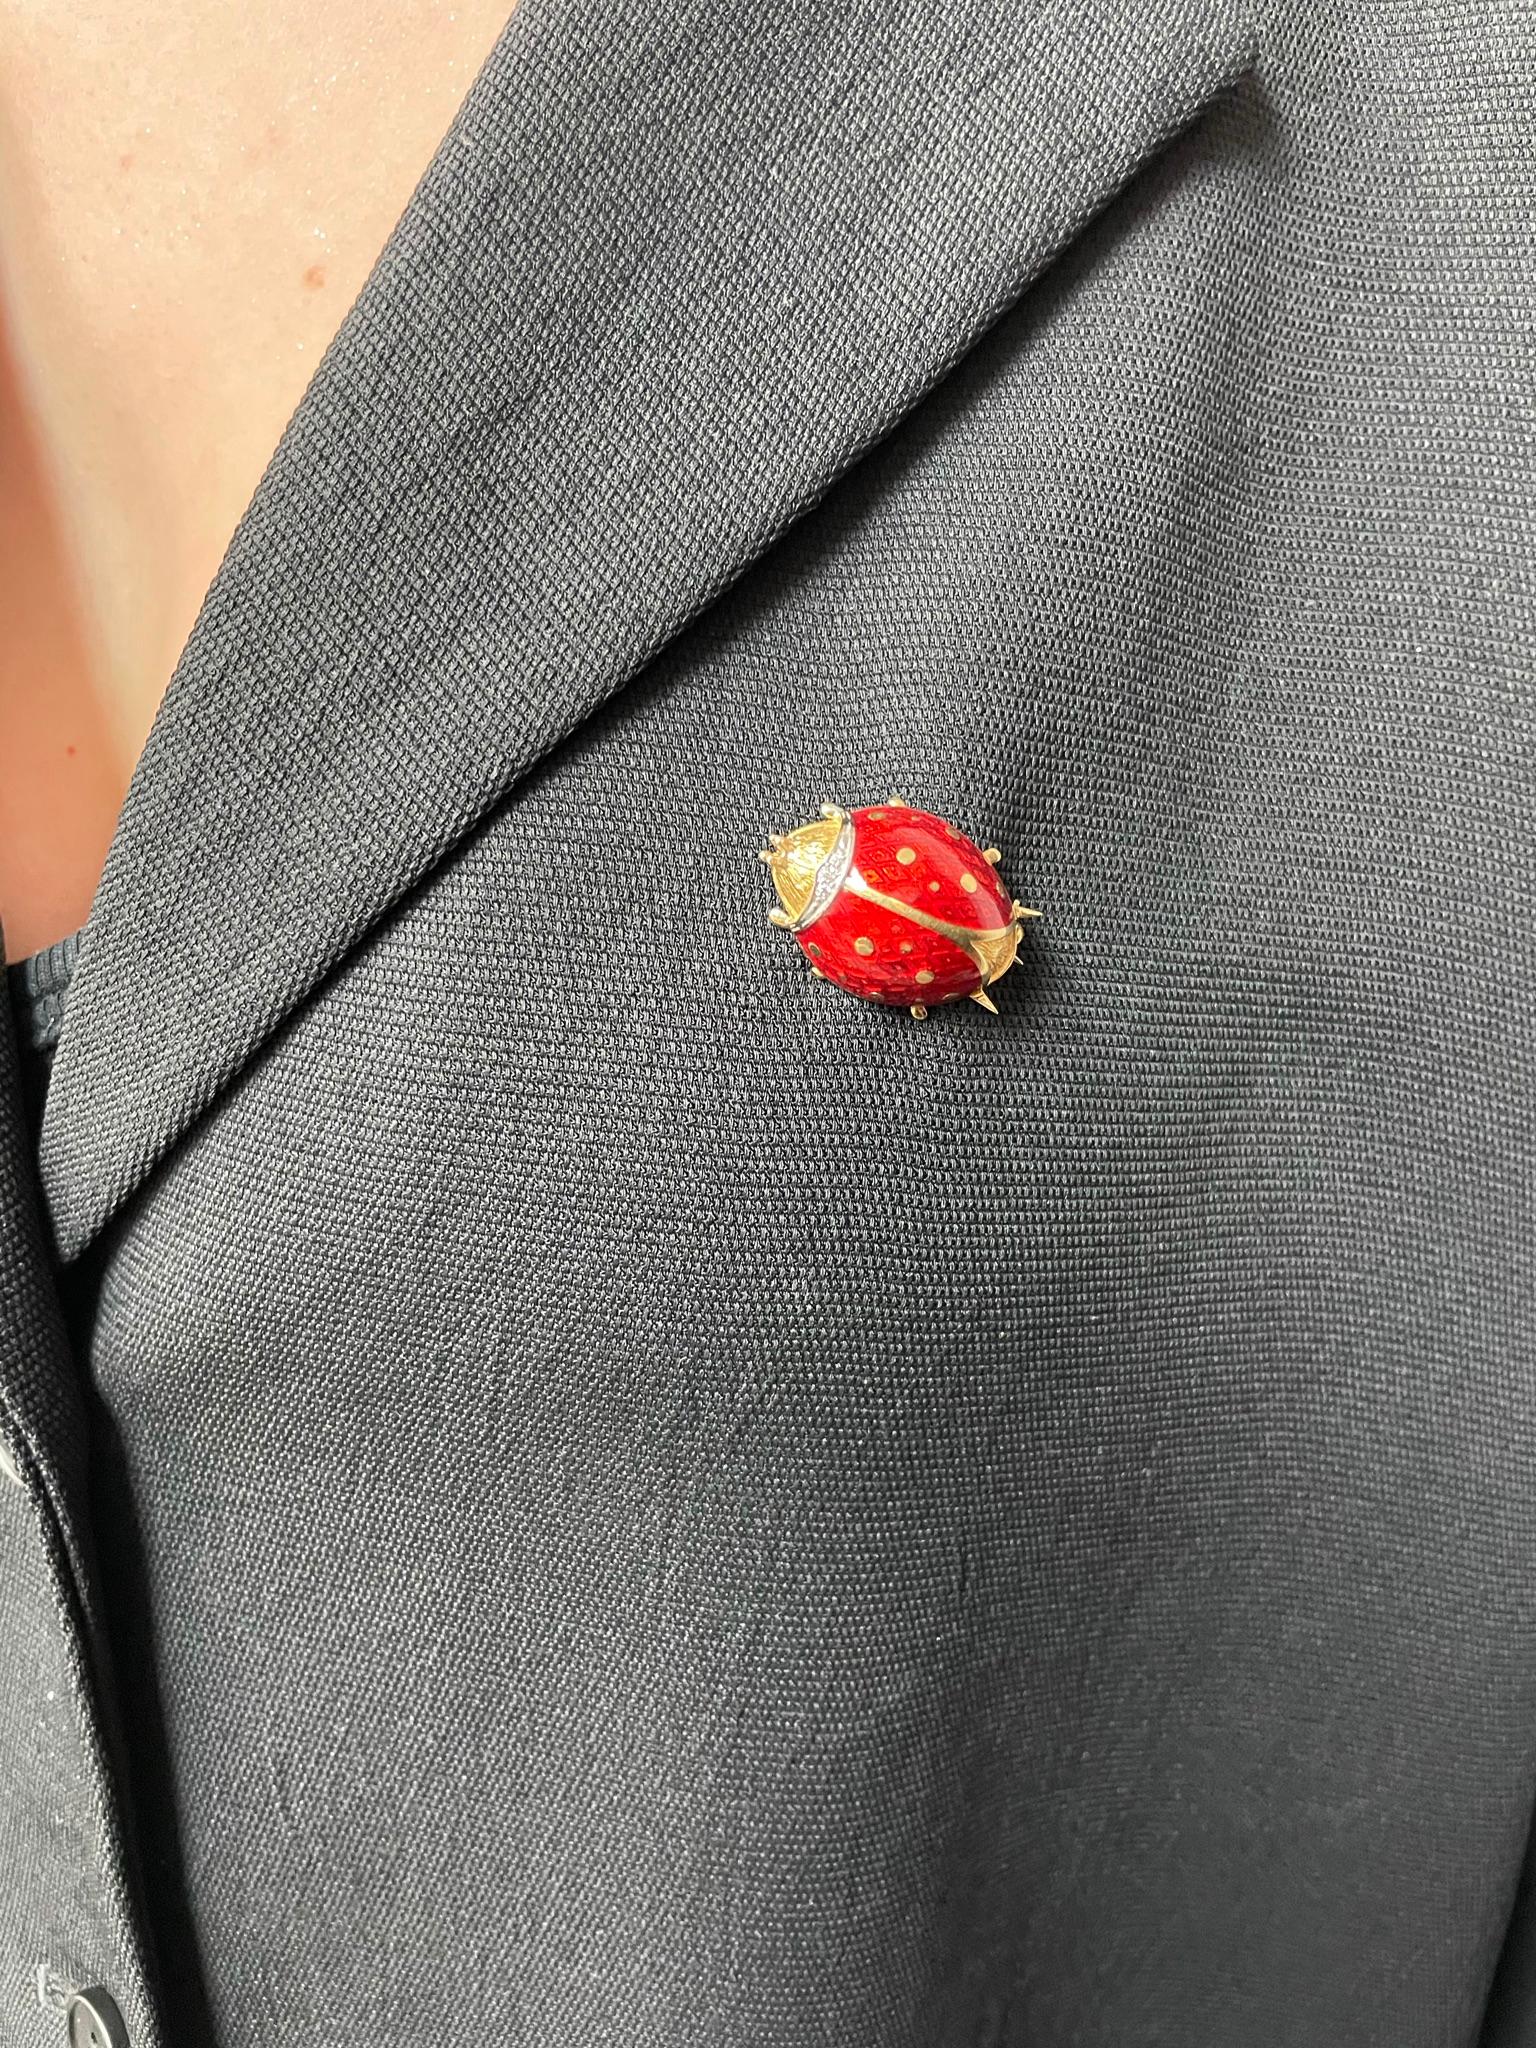 A Van Cleef & Arpels Ladybug Brooch Pin with Diamonds made in 18 Karat Yellow Gold. The length is 1 inch and the width is 0.50 inches. Stamped 